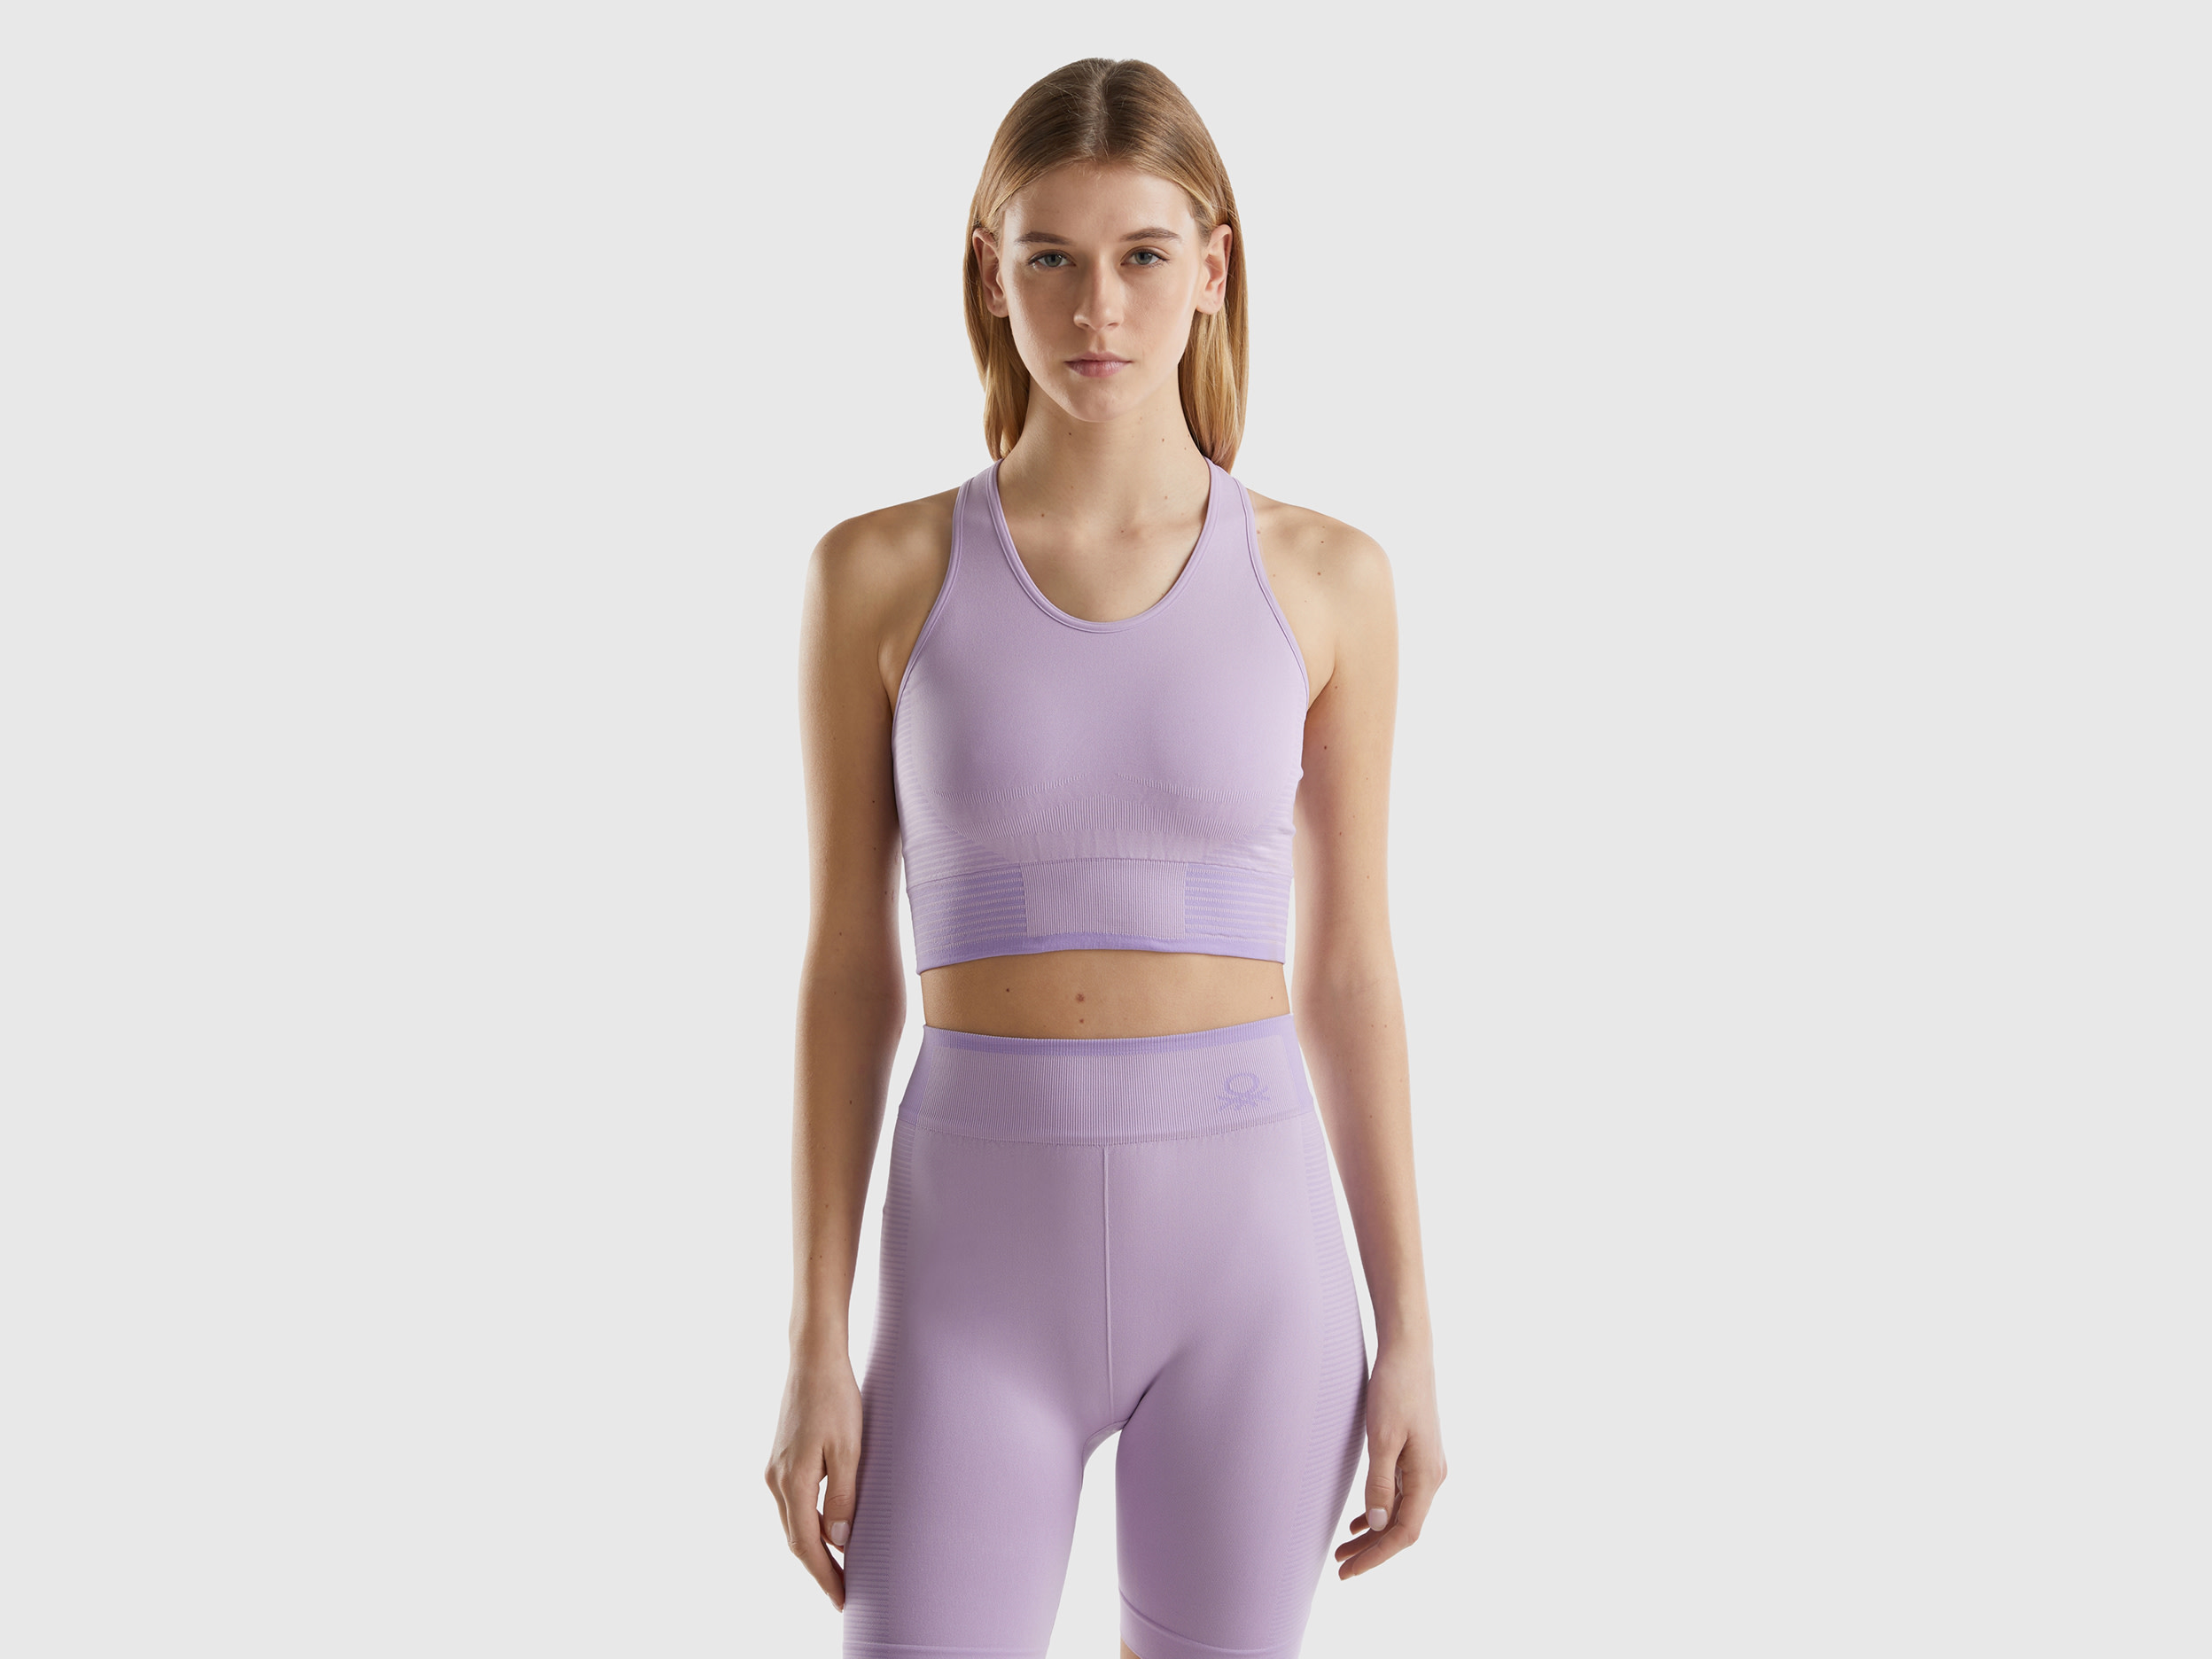 Image of Benetton, Seamless Sports Crop Top, size M, Lilac, Women